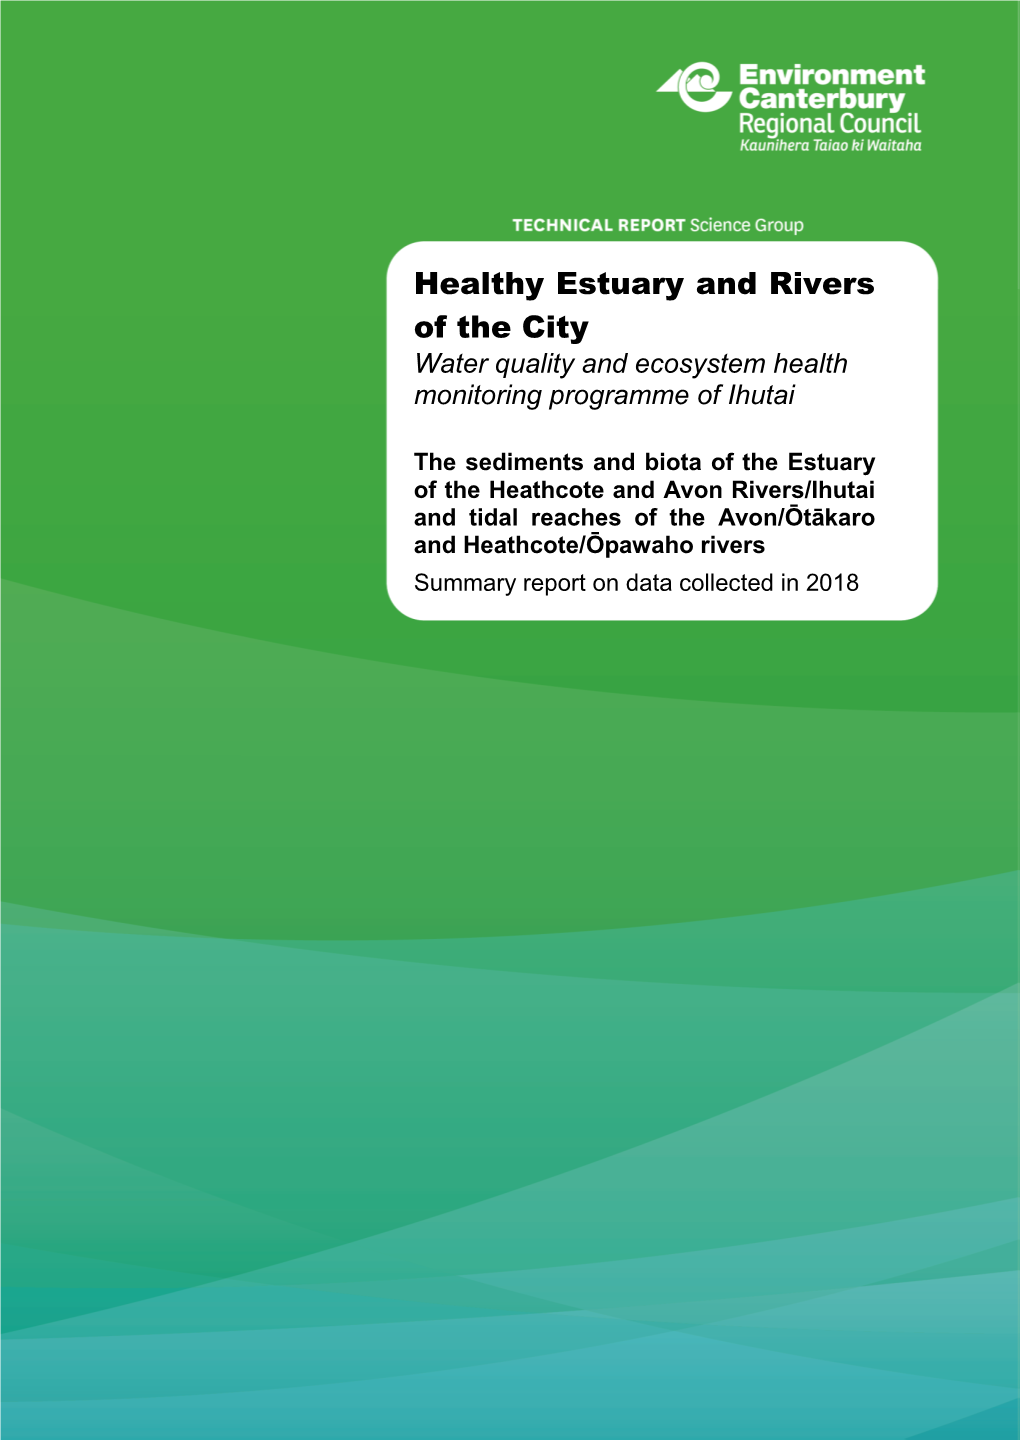 Healthy Estuary and Rivers of the City Water Quality and Ecosystem Health Monitoring Programme of Ihutai